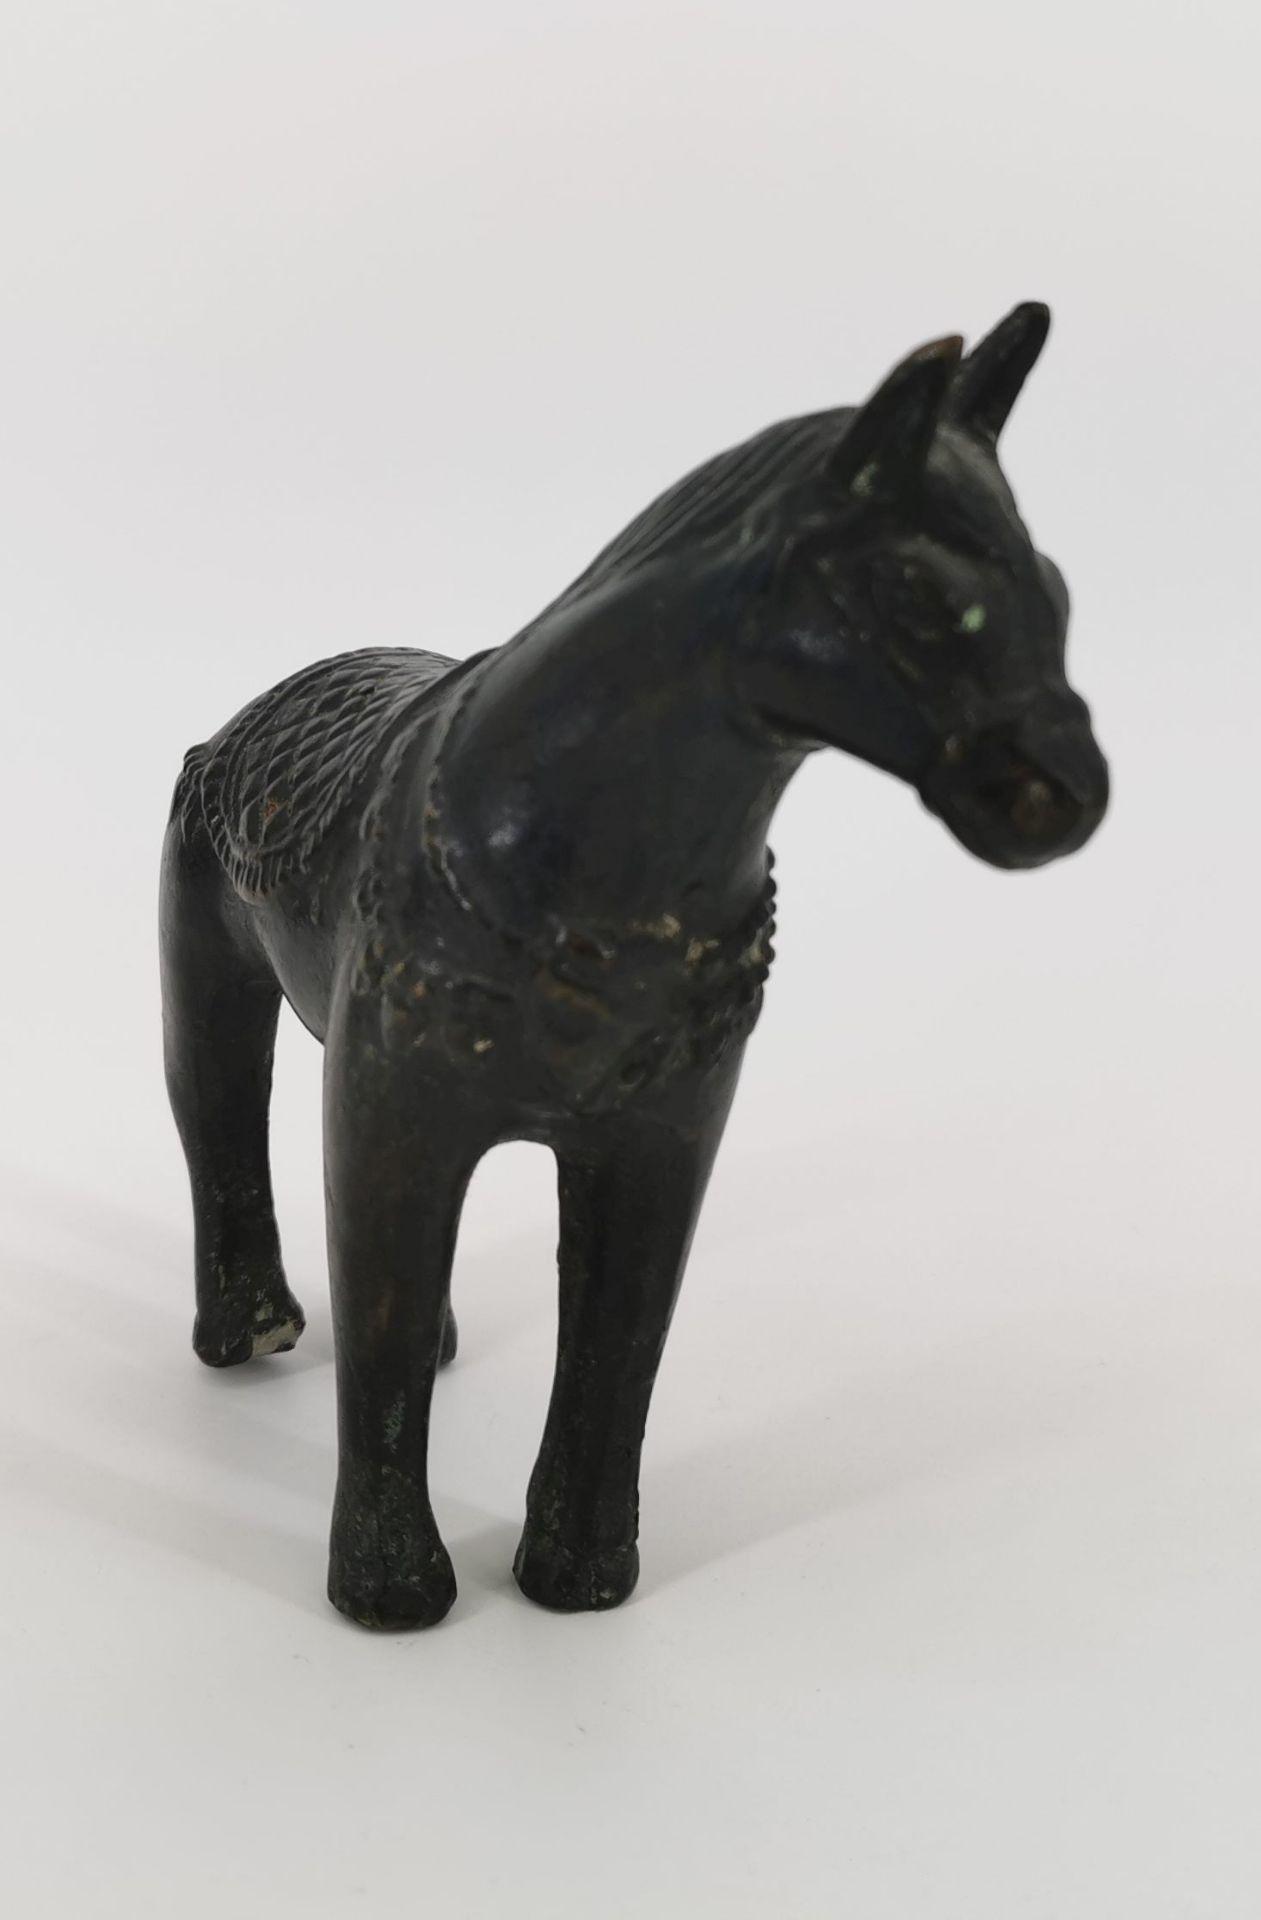 SCULPTURE "HORSE" - Image 3 of 4